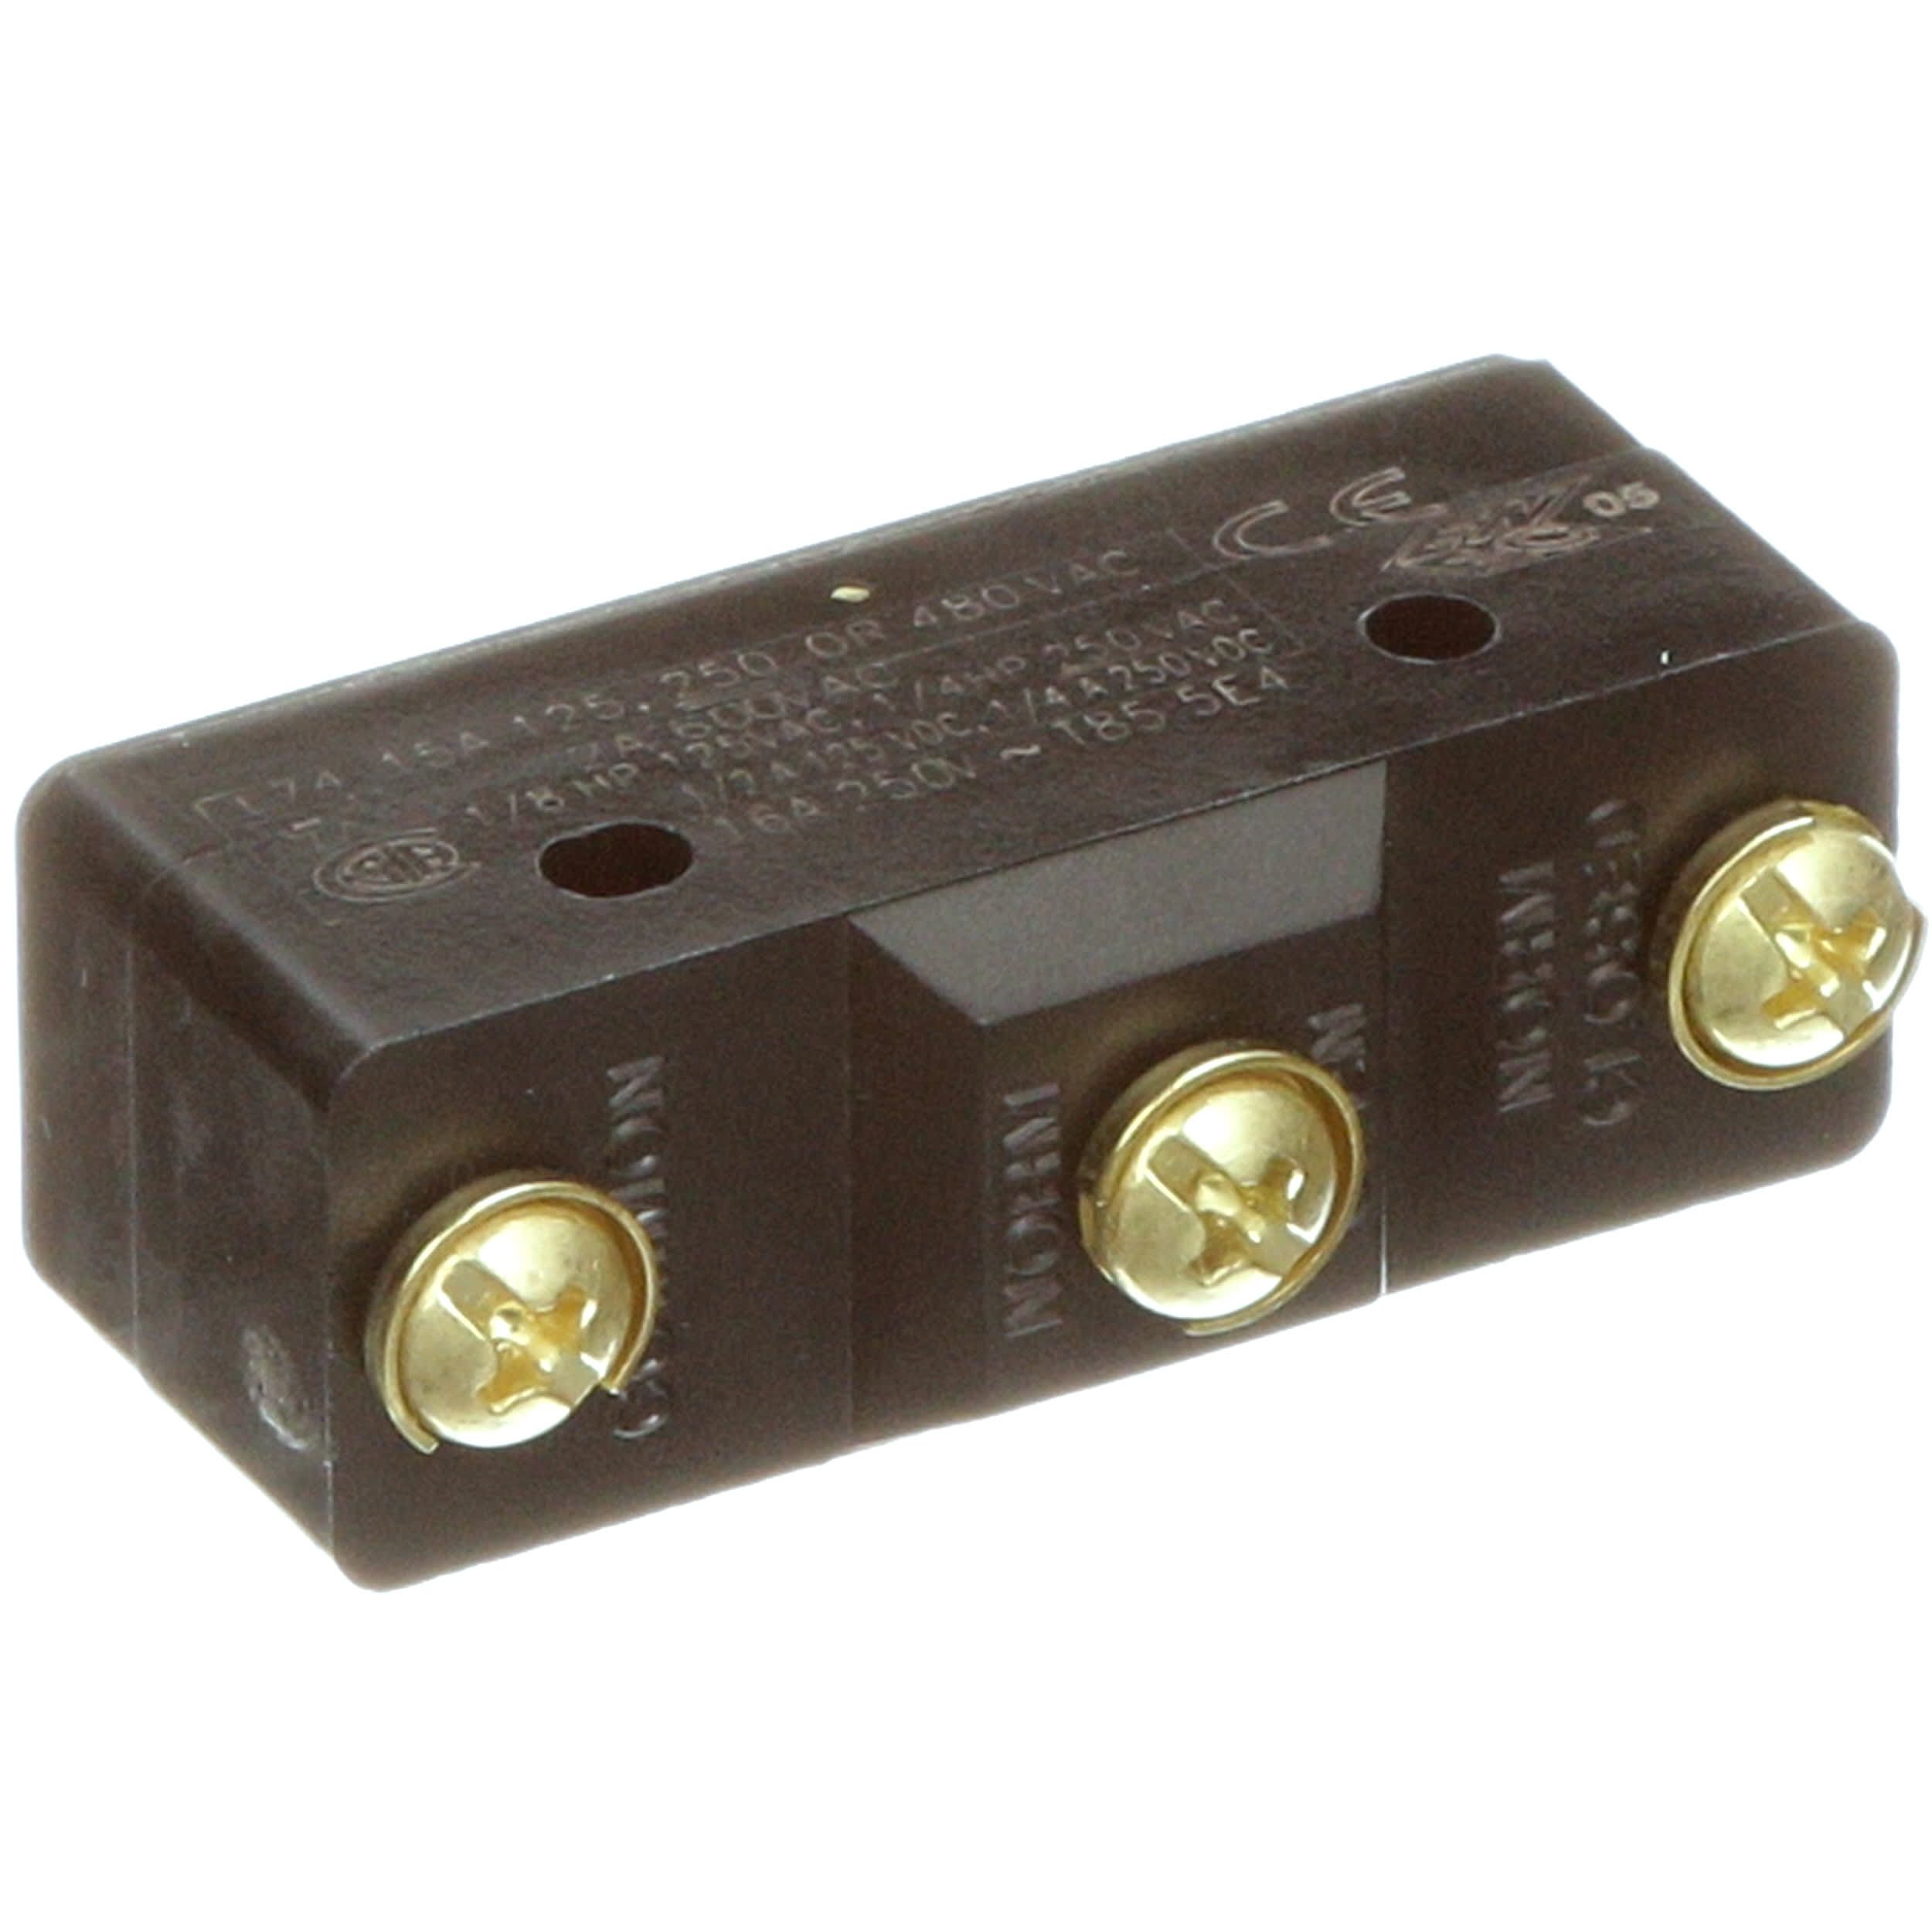 TOP PIN PLUNGER BZC-2RQ1-A2 By HONEYWELL S&C BASIC SWITCH